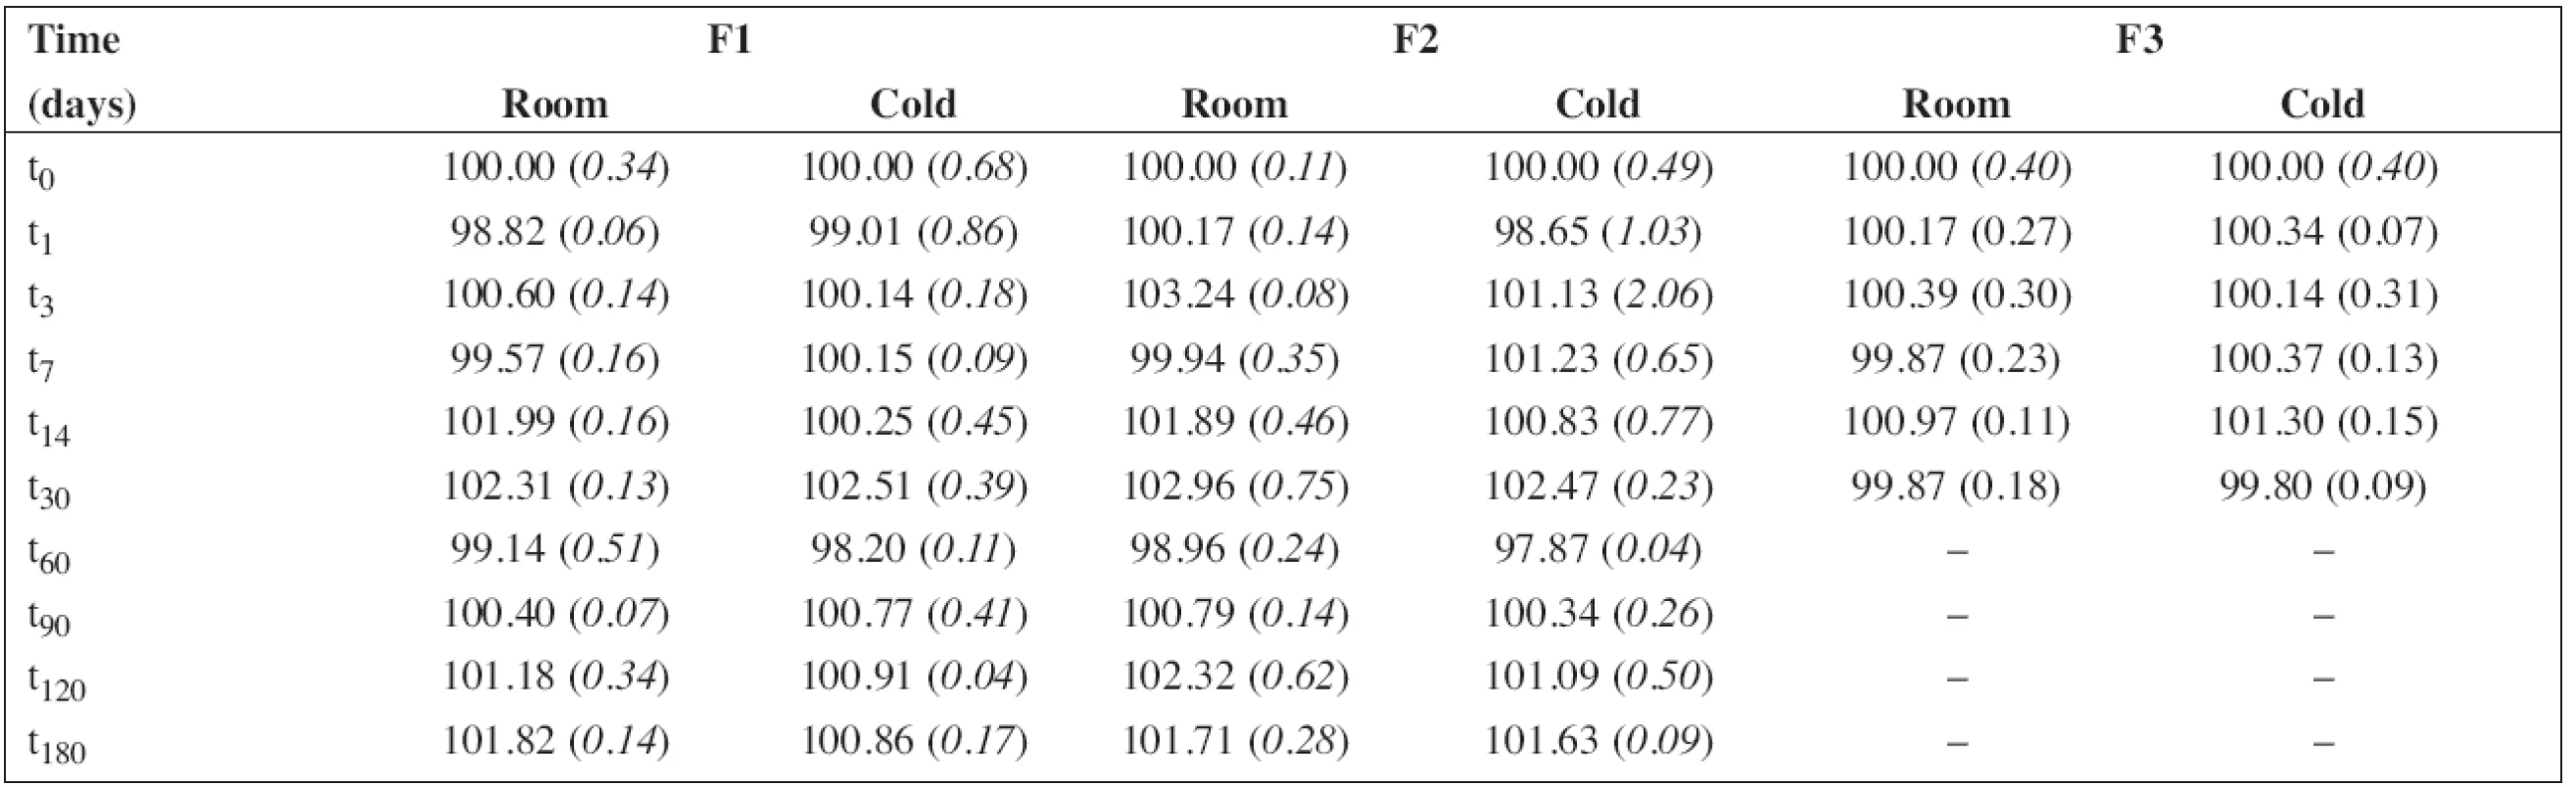 The percentage content of propranolol hydrochloride during the stability study at room temperature (room) and/or in a refrigerator (cold). RSD (%) in brackets